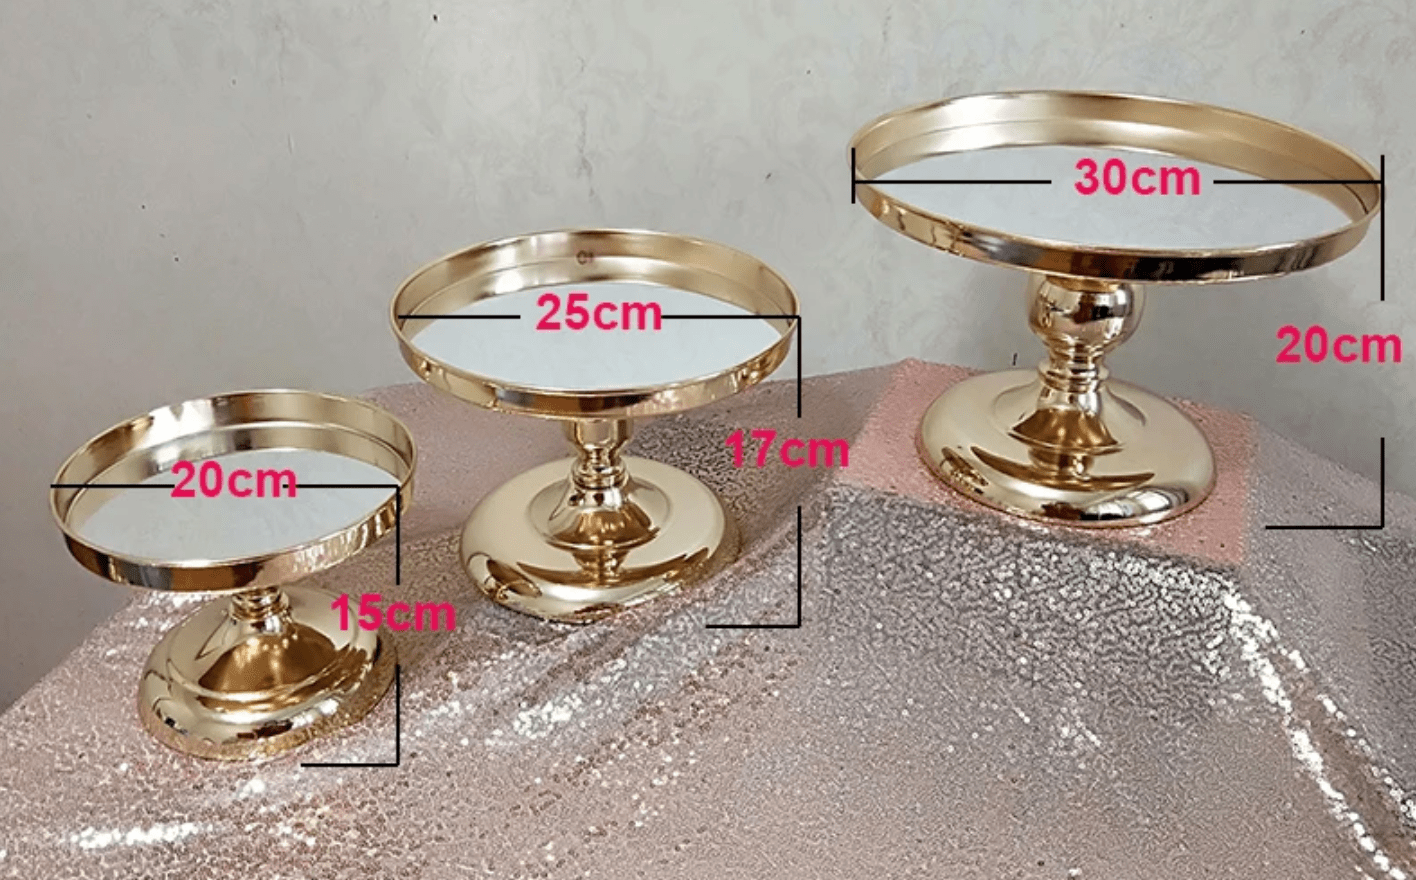 WeddingStory Shop 1 layer 8 inch Cake stand collection 2 tier, 3 tier